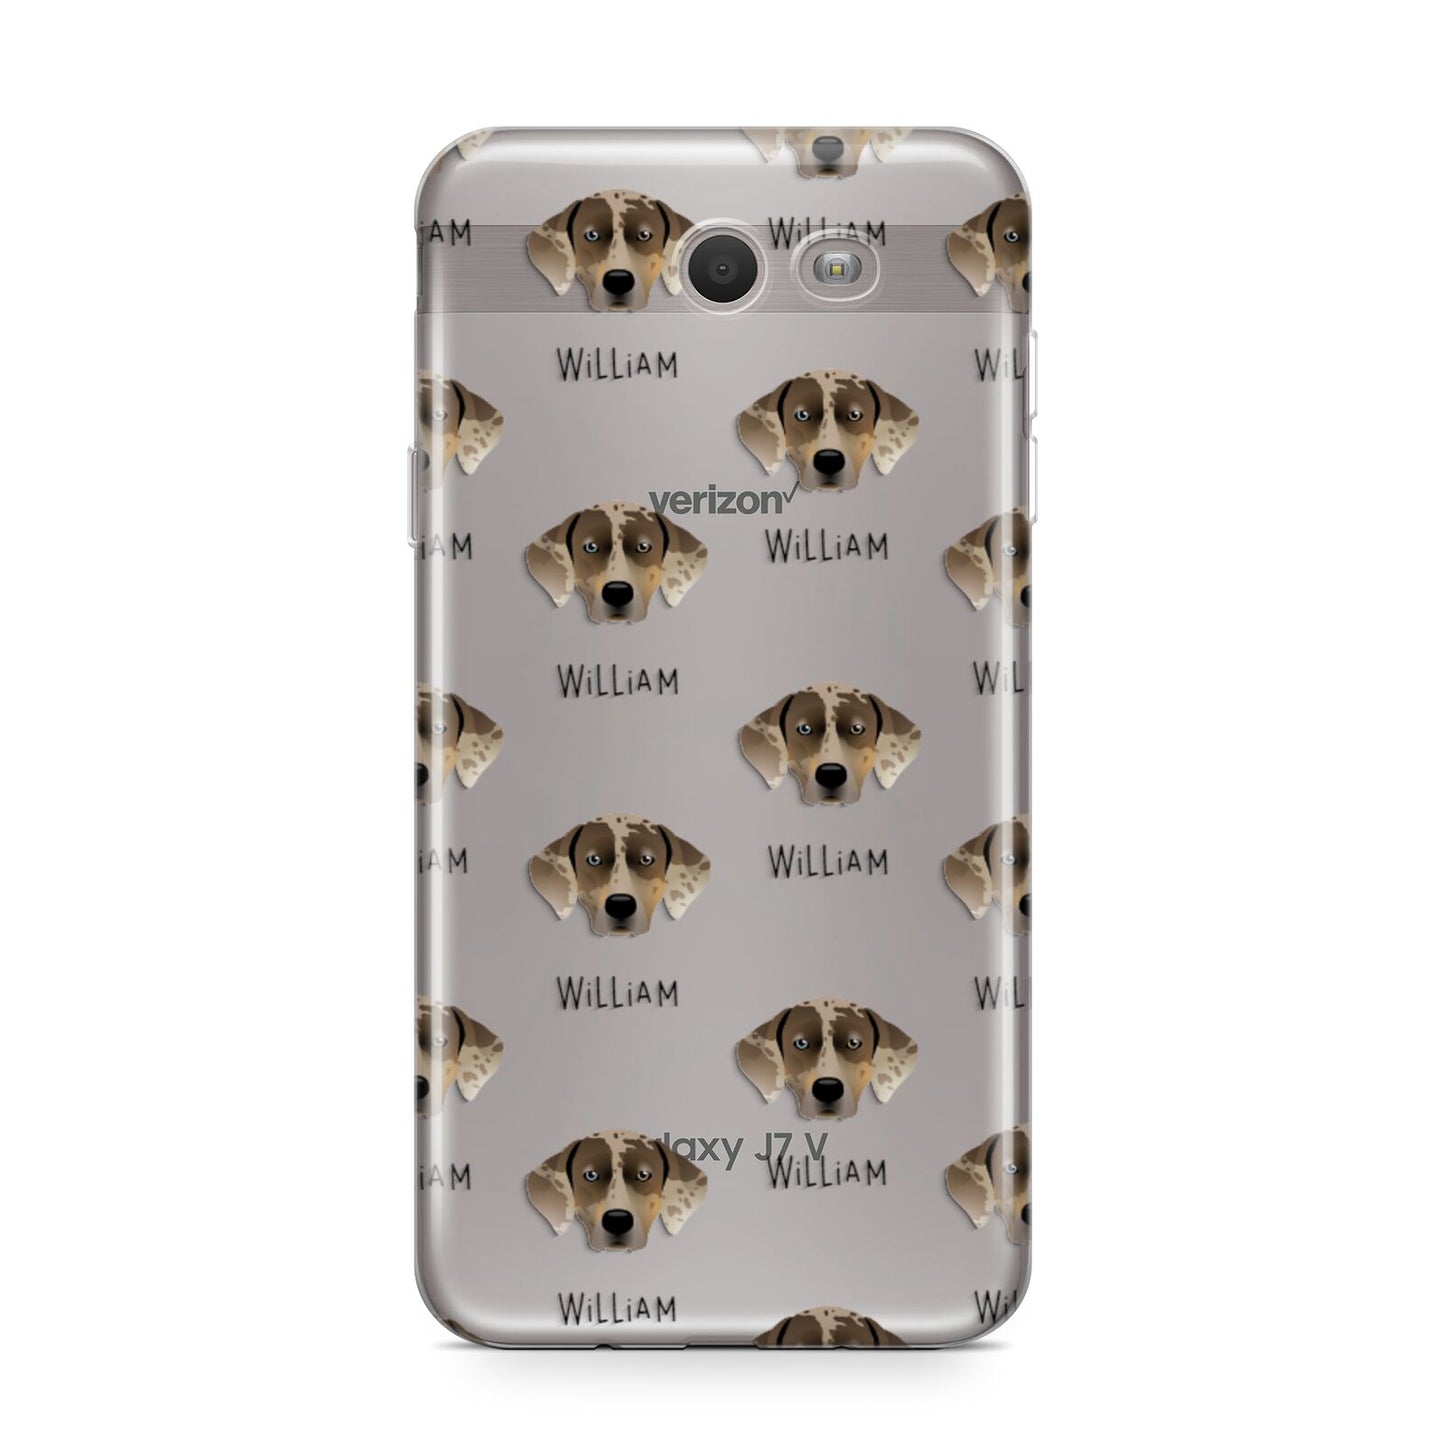 Catahoula Leopard Dog Icon with Name Samsung Galaxy J7 2017 Case